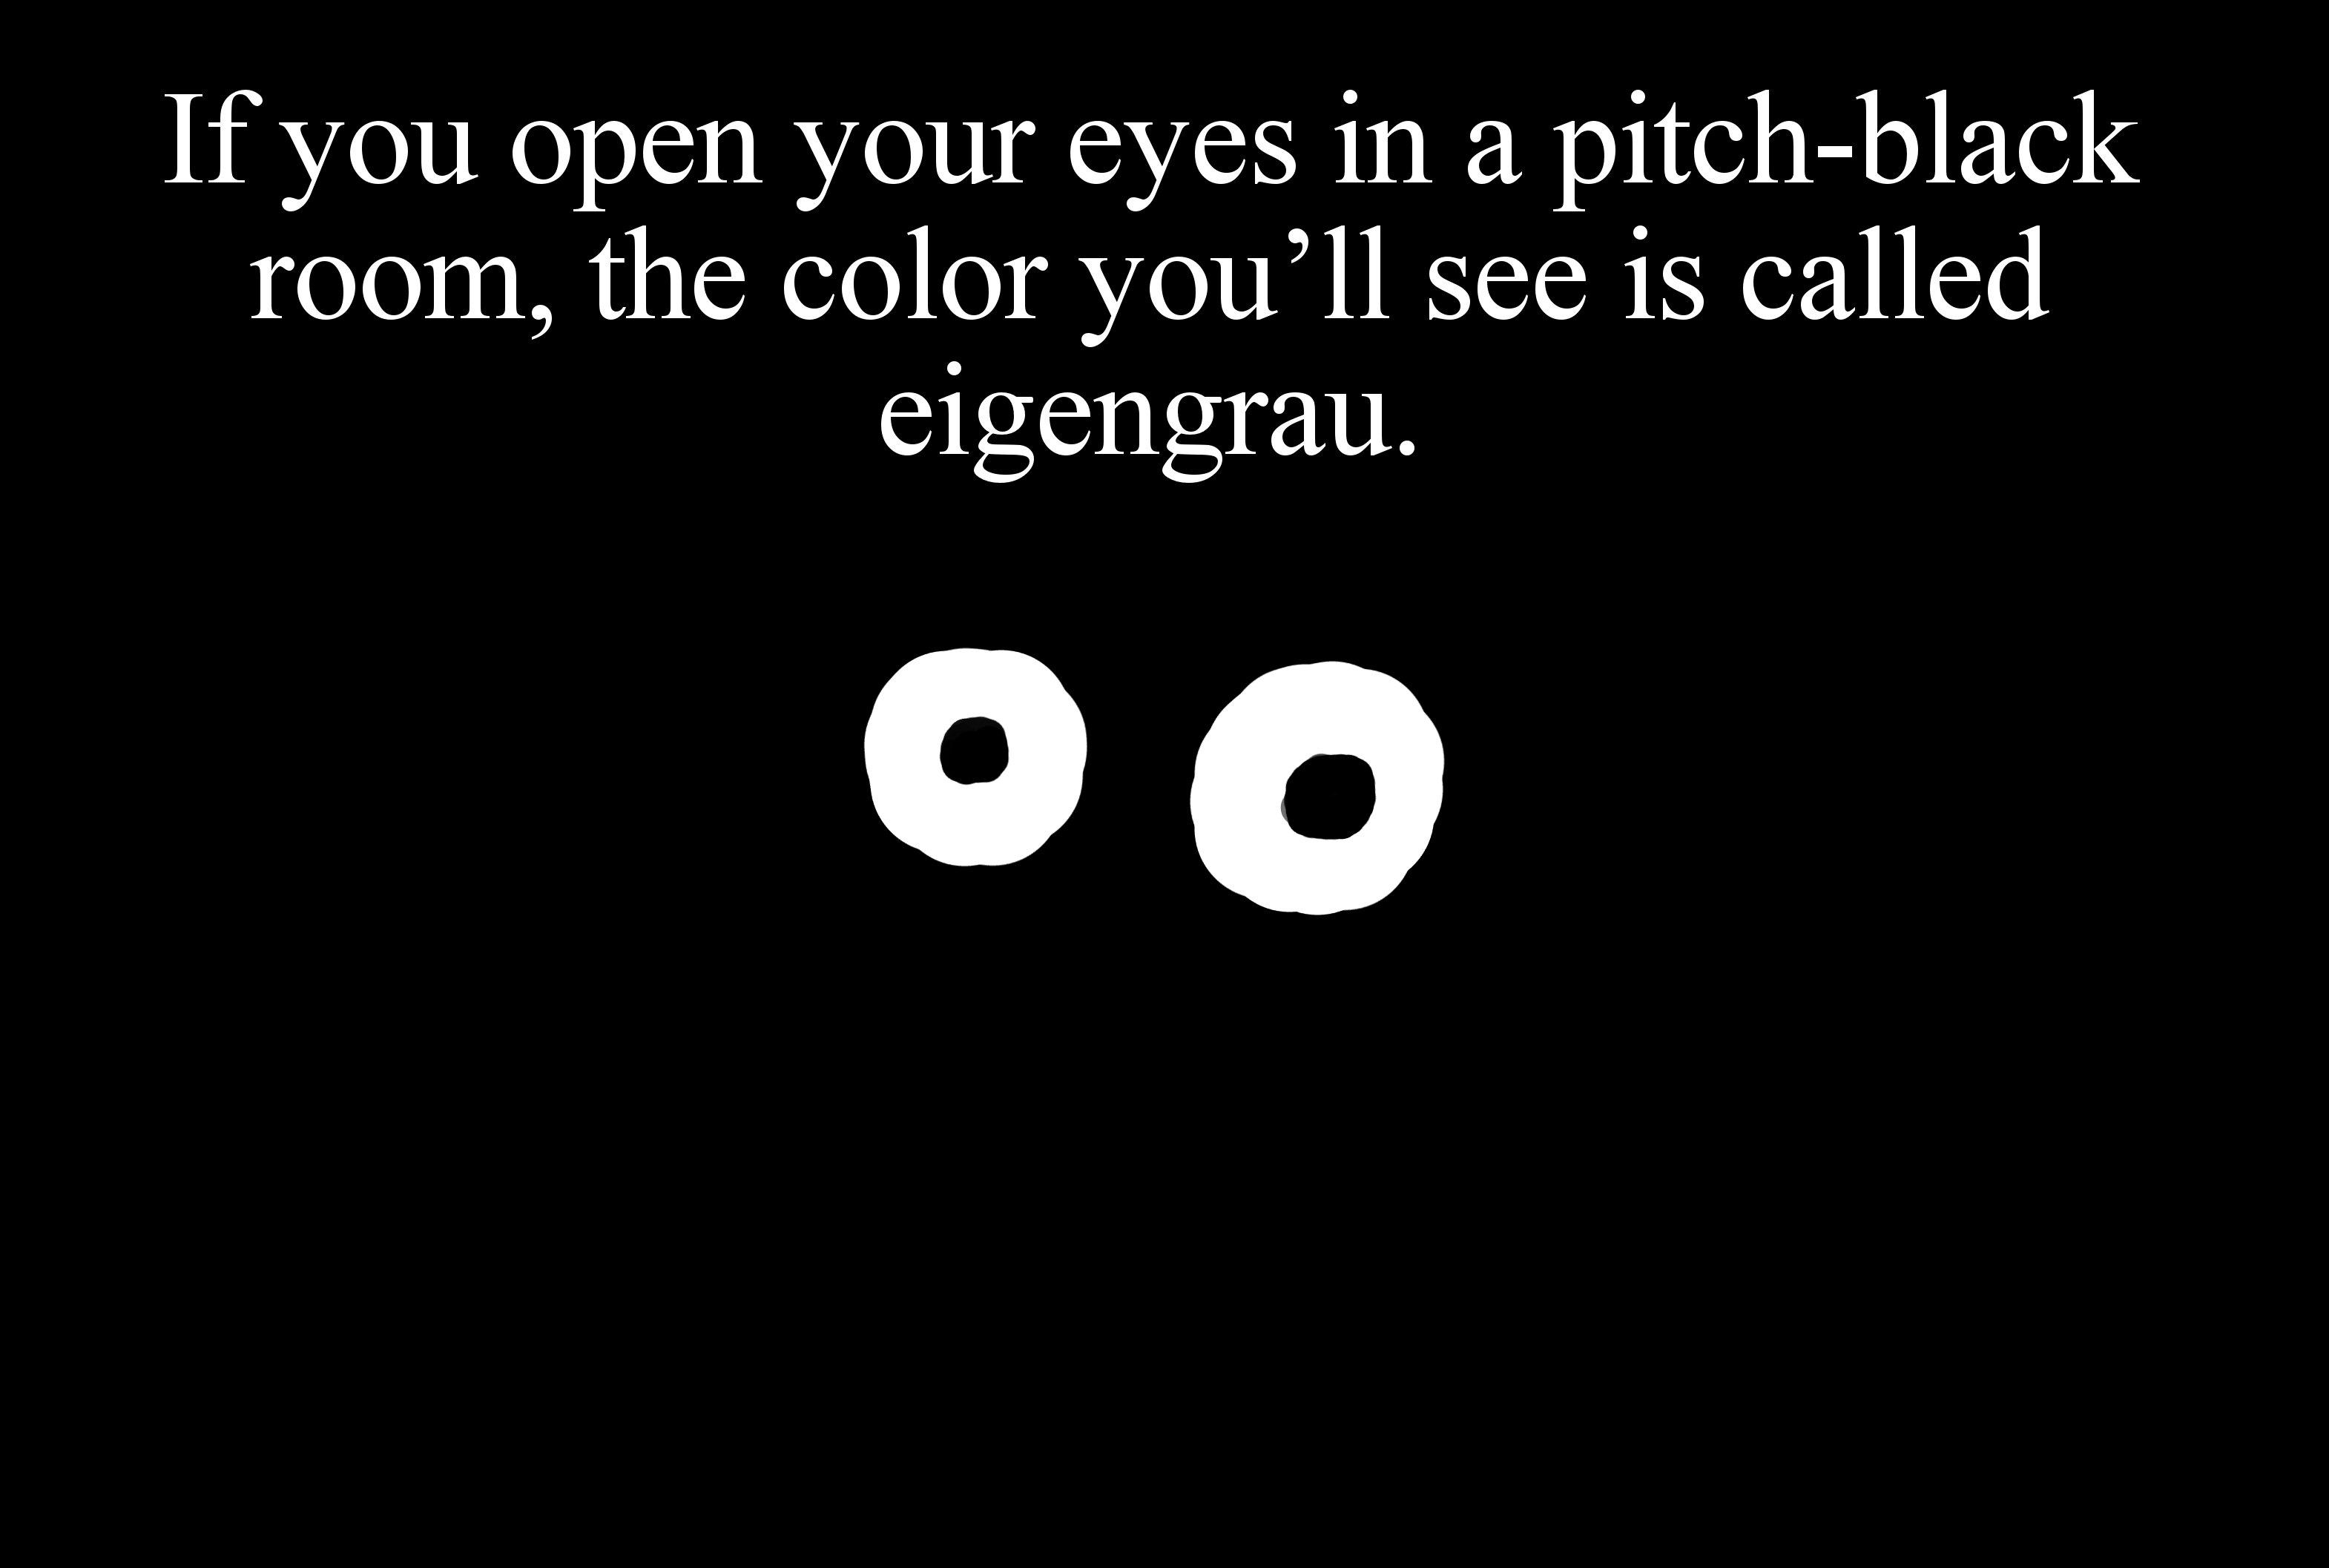 monochrome - If you open your eyes in a pitchblack room, the color you'll see is called eigengrau. O O